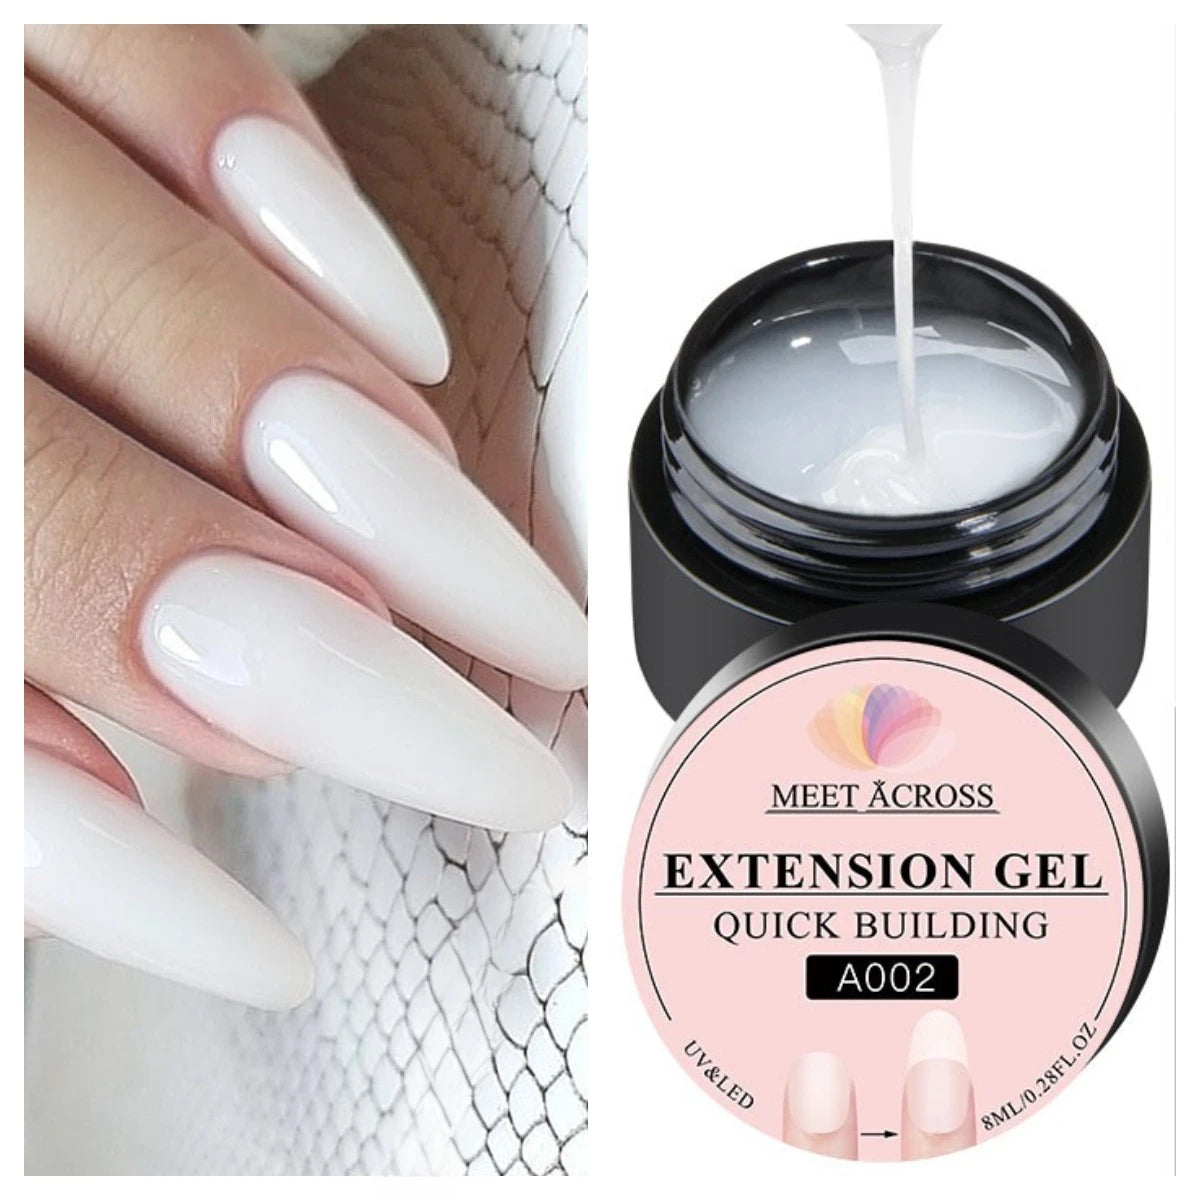 MEET ACROSS Milky White Clear 8ml Extension Nail Gel Polish For French Nails Art Manicure Semi Permanent UV Varnish Tips Tools